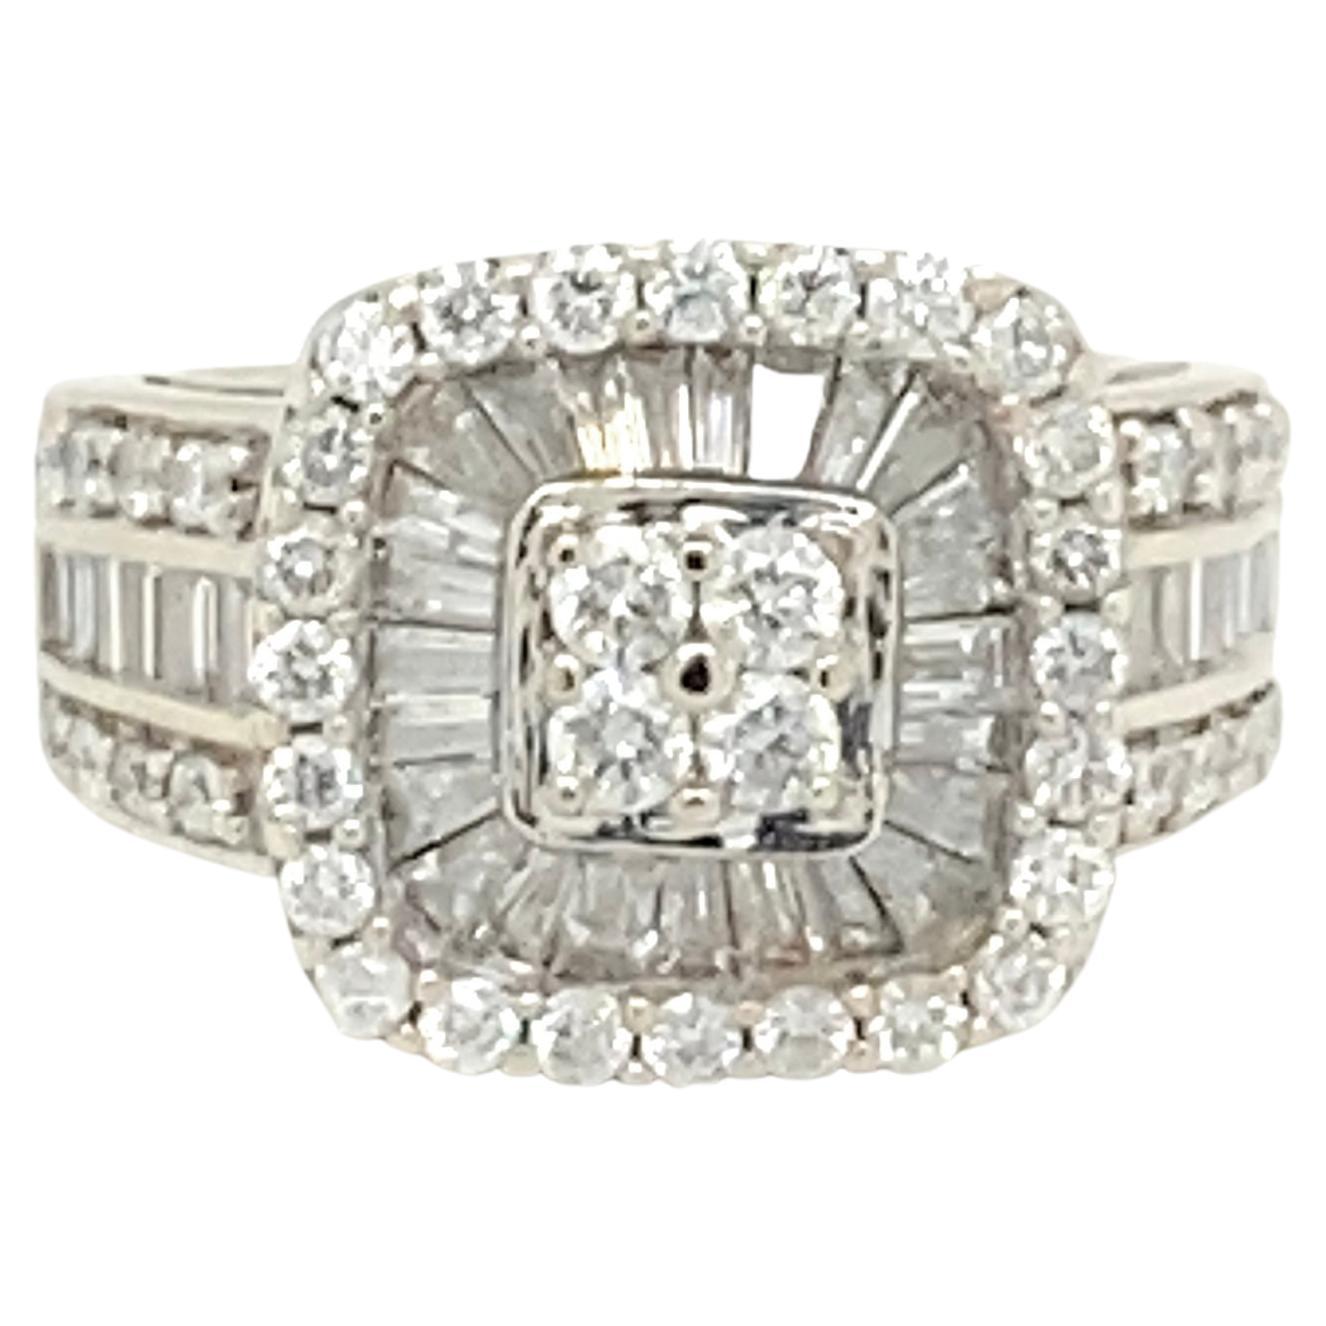 2.25 Carat Diamond Cluster Ring For Sale